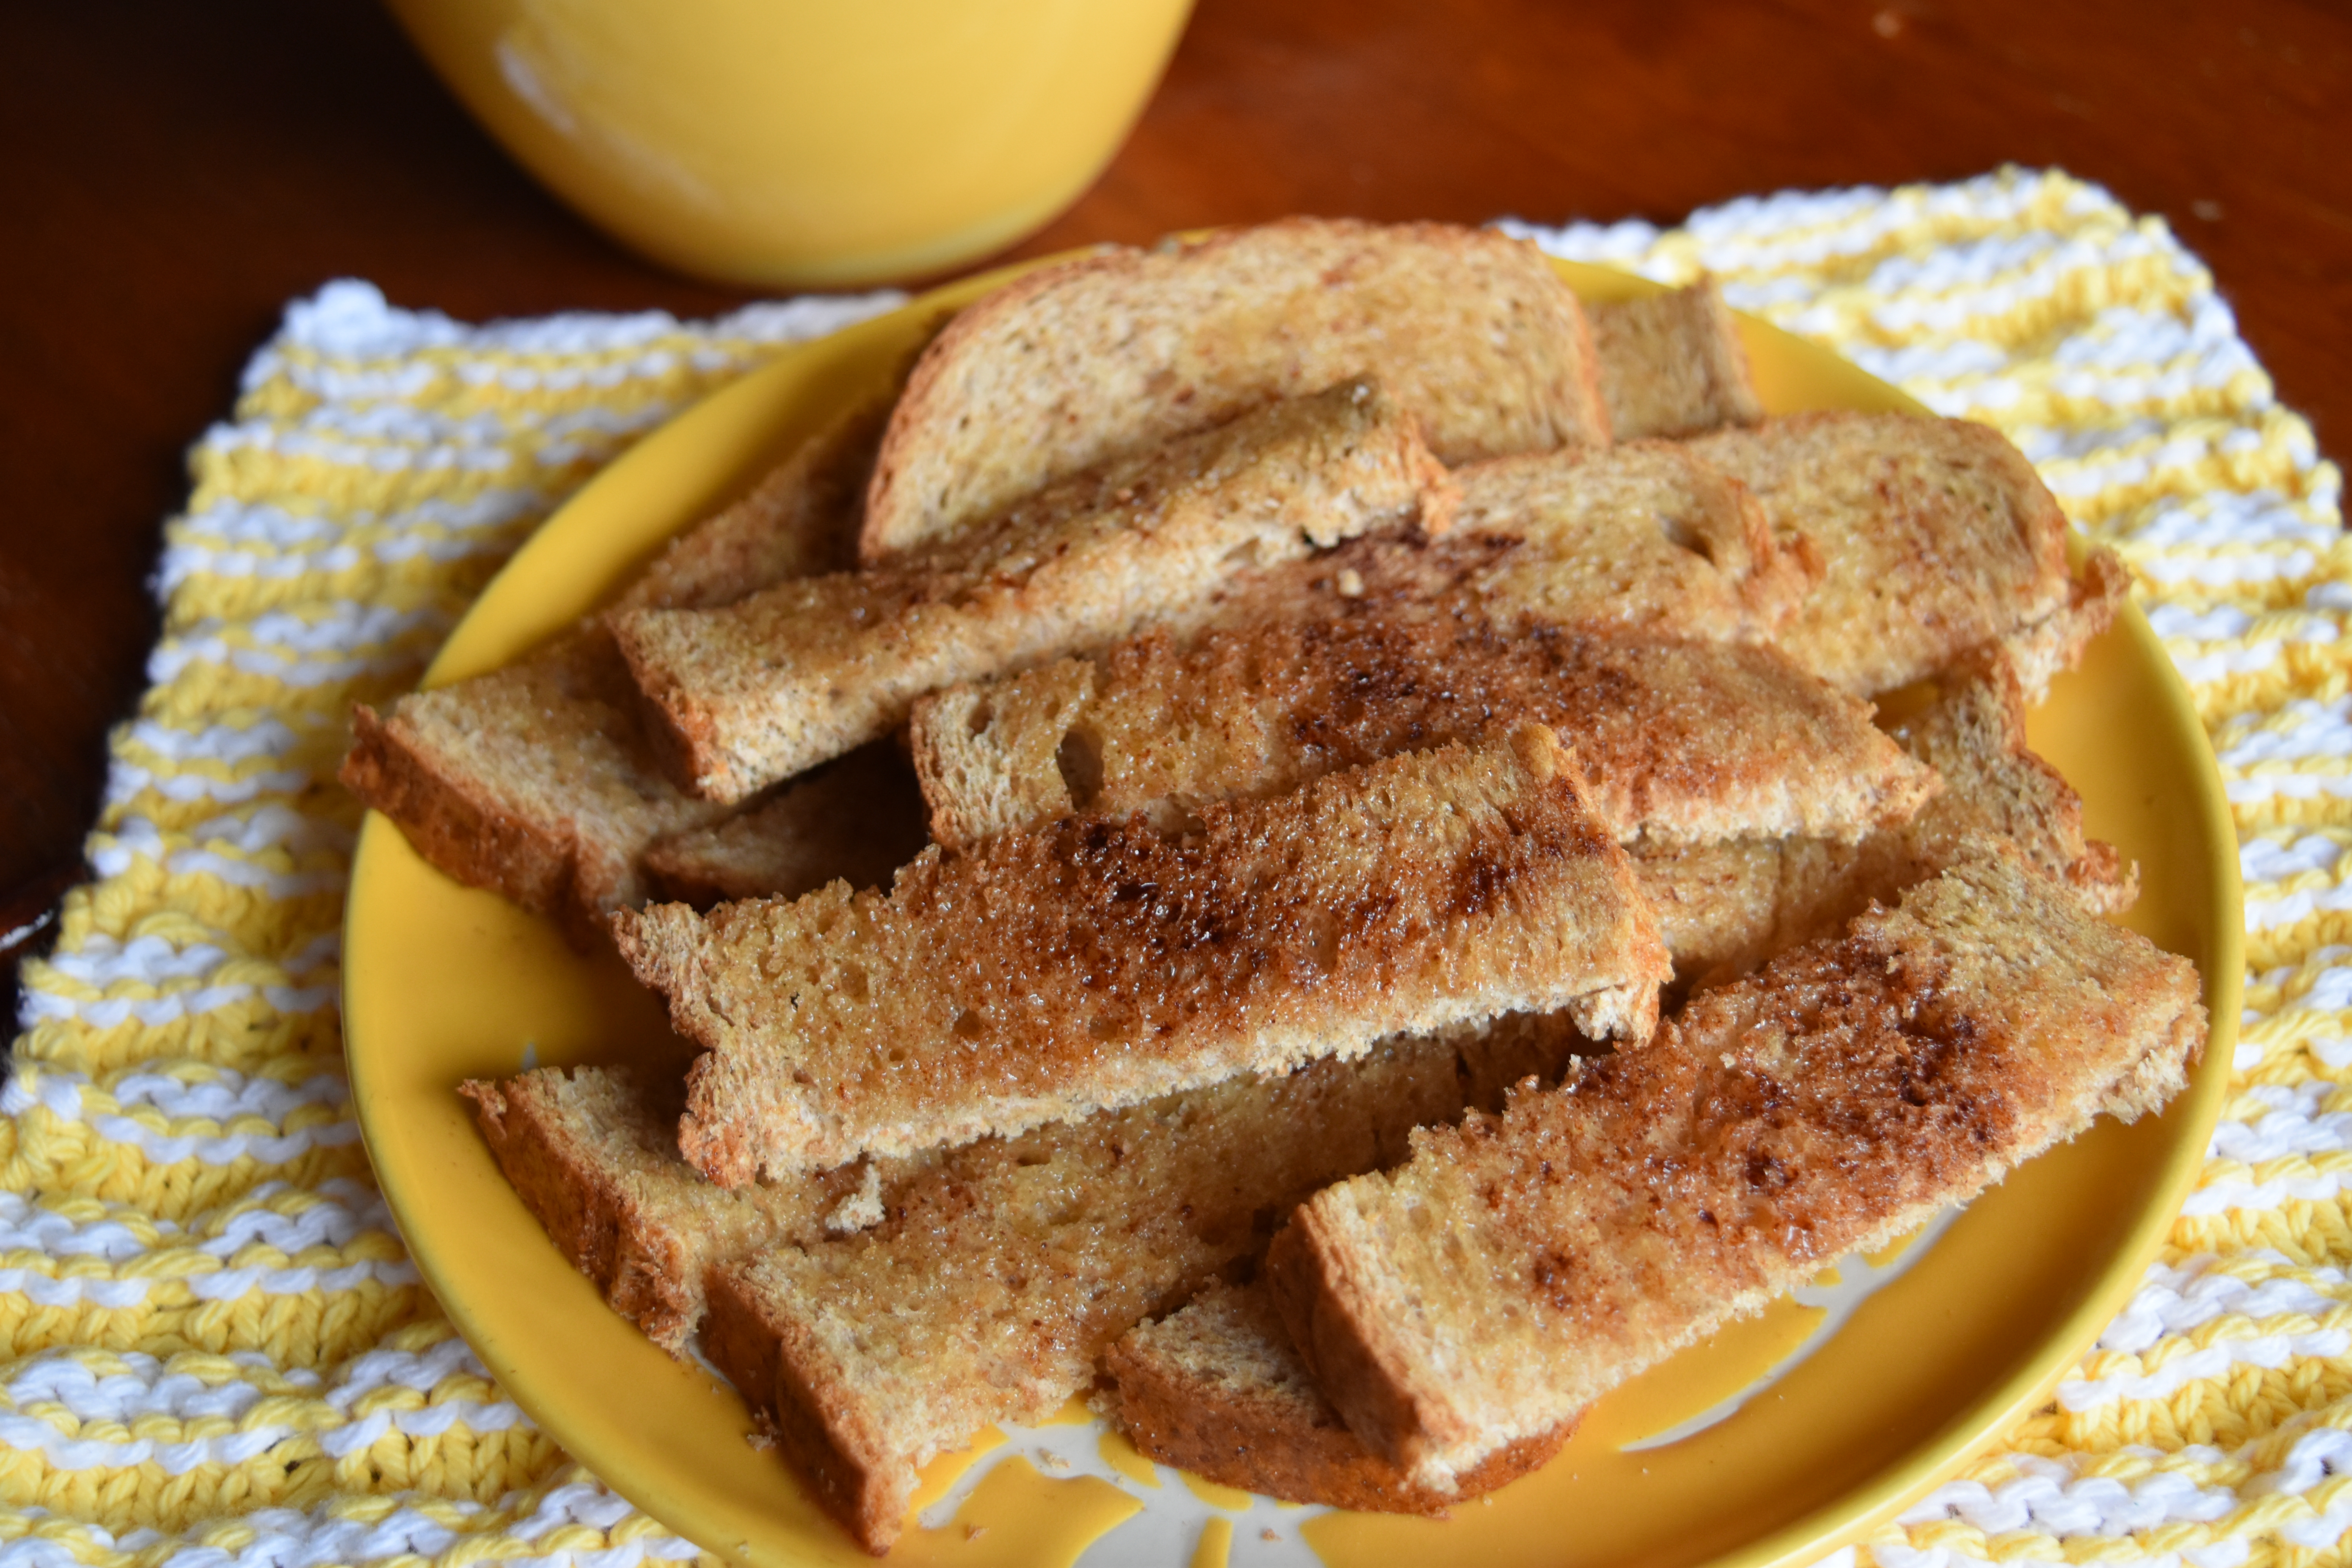 Our toast sticks with honey and cinnamon.